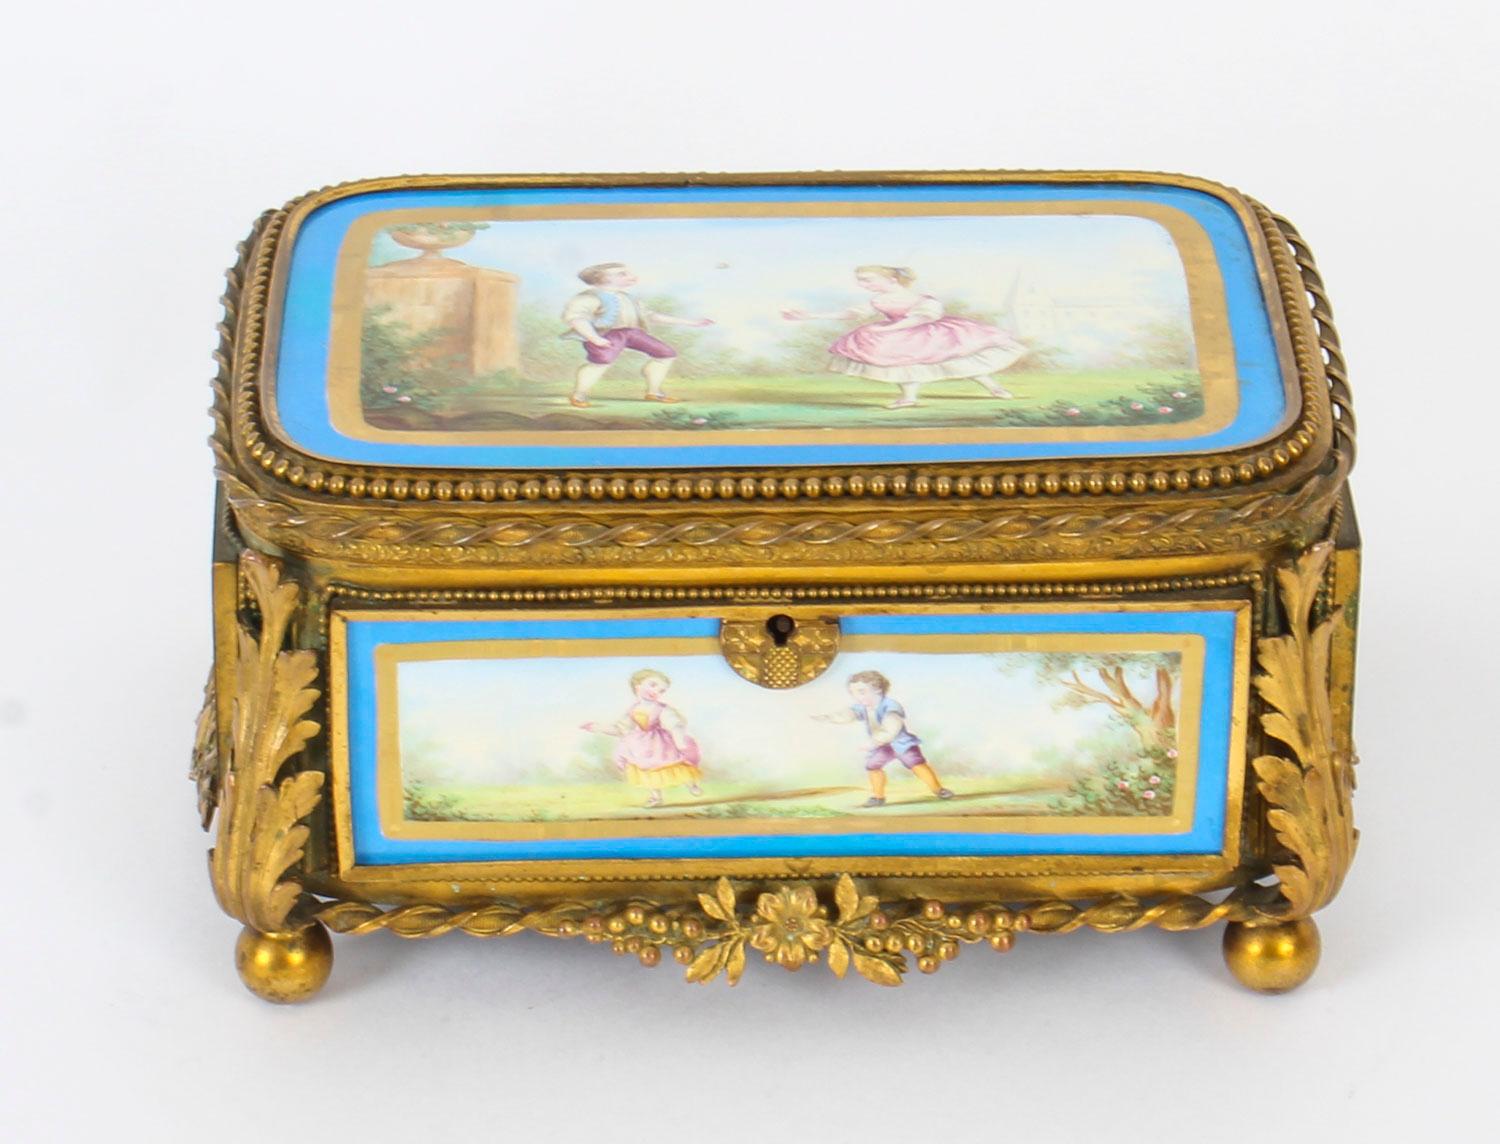 This is a fabulous antique French Ormolu and Sevres Porcelain jewellery casket, circa 1860 in date.

This magnificent casket is rectangular in shape with the top and each side exceptionally well decorated with superb ormolu mounts in the form of